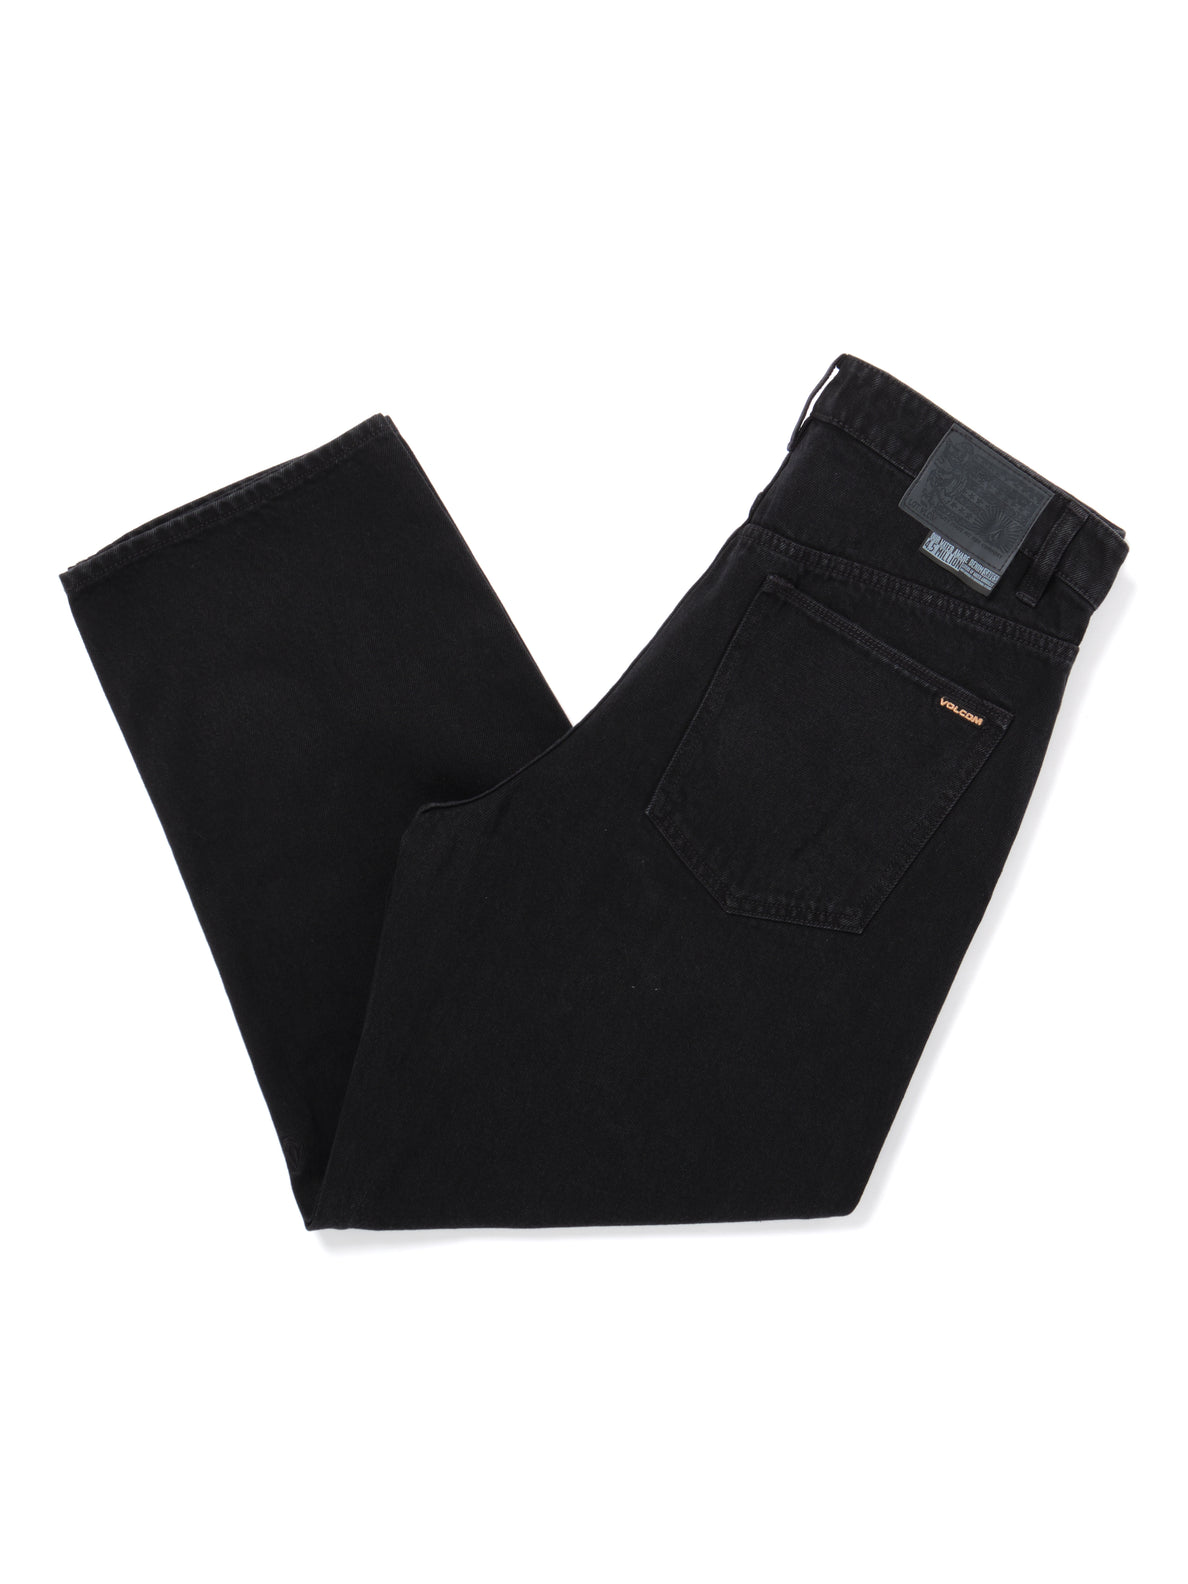 Billow Tapered Jeans - Black